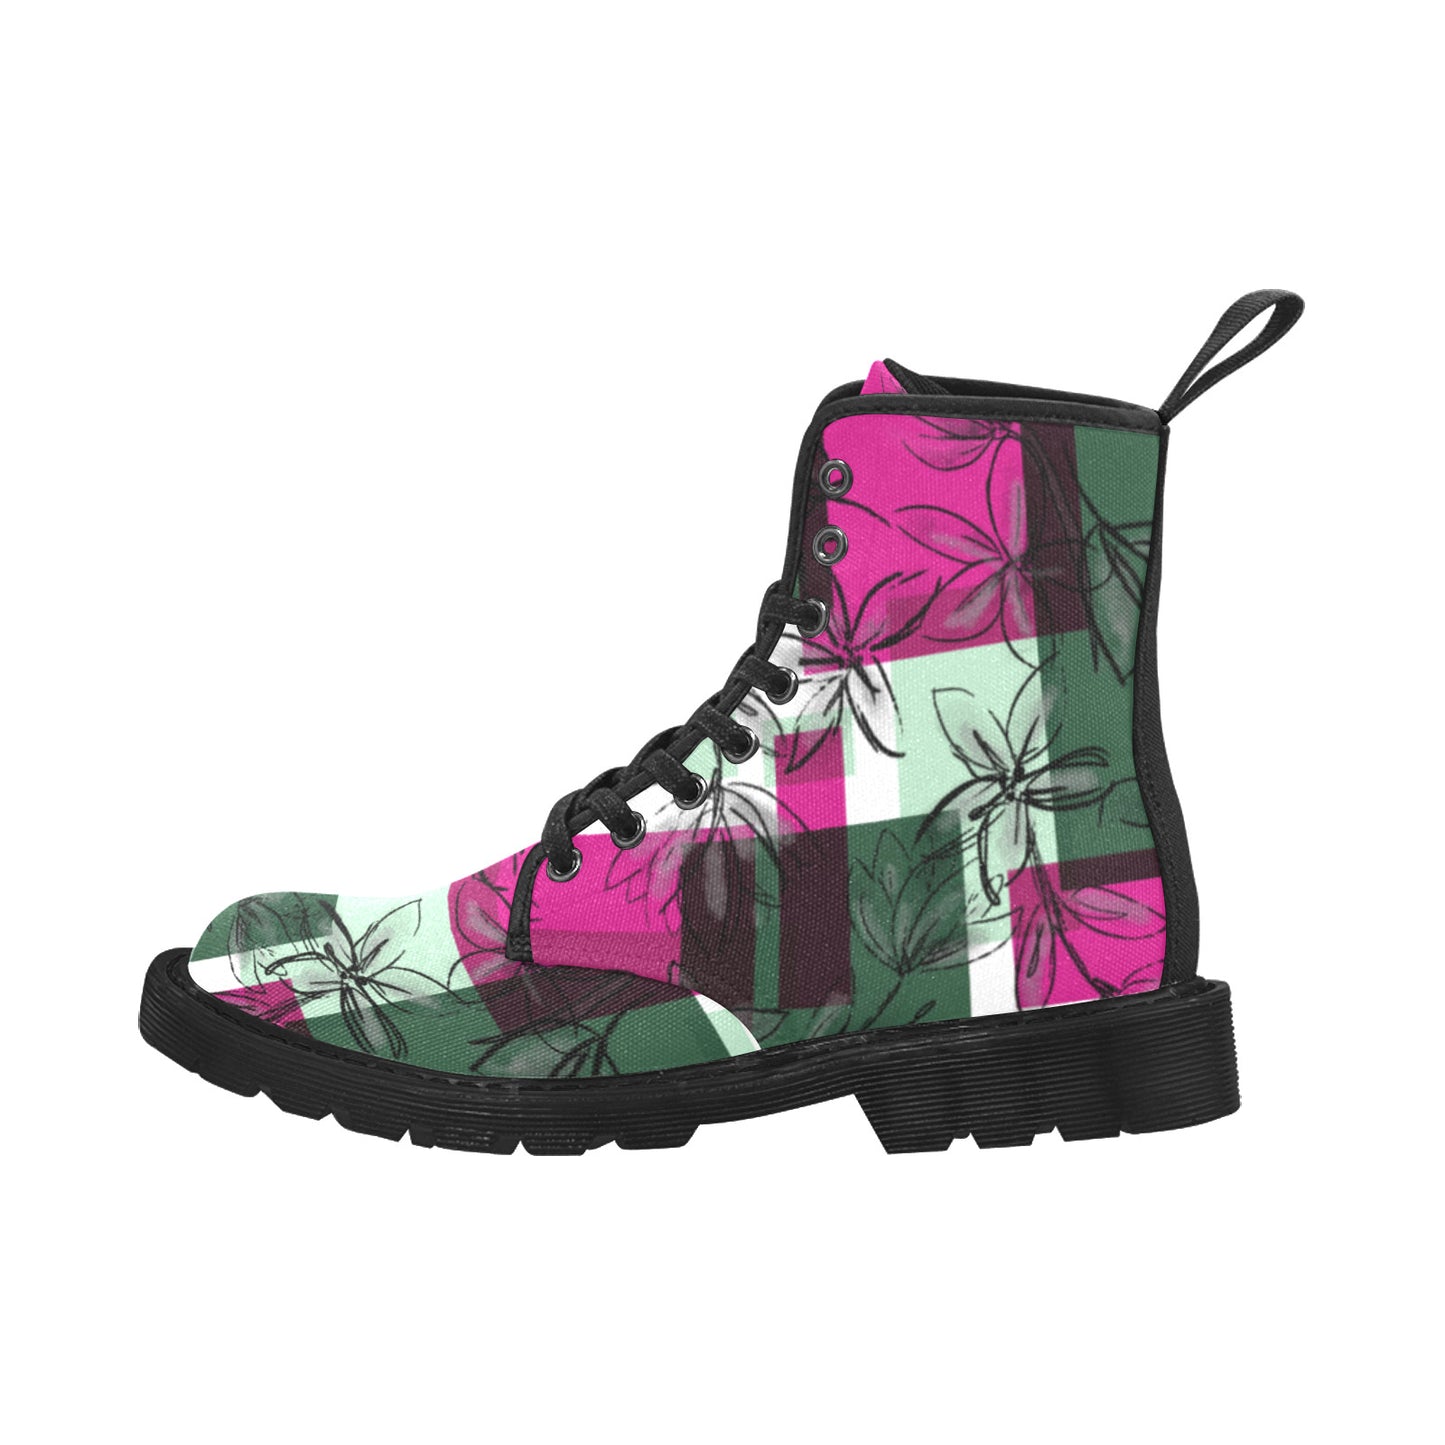 Spring Sky Boots for Women